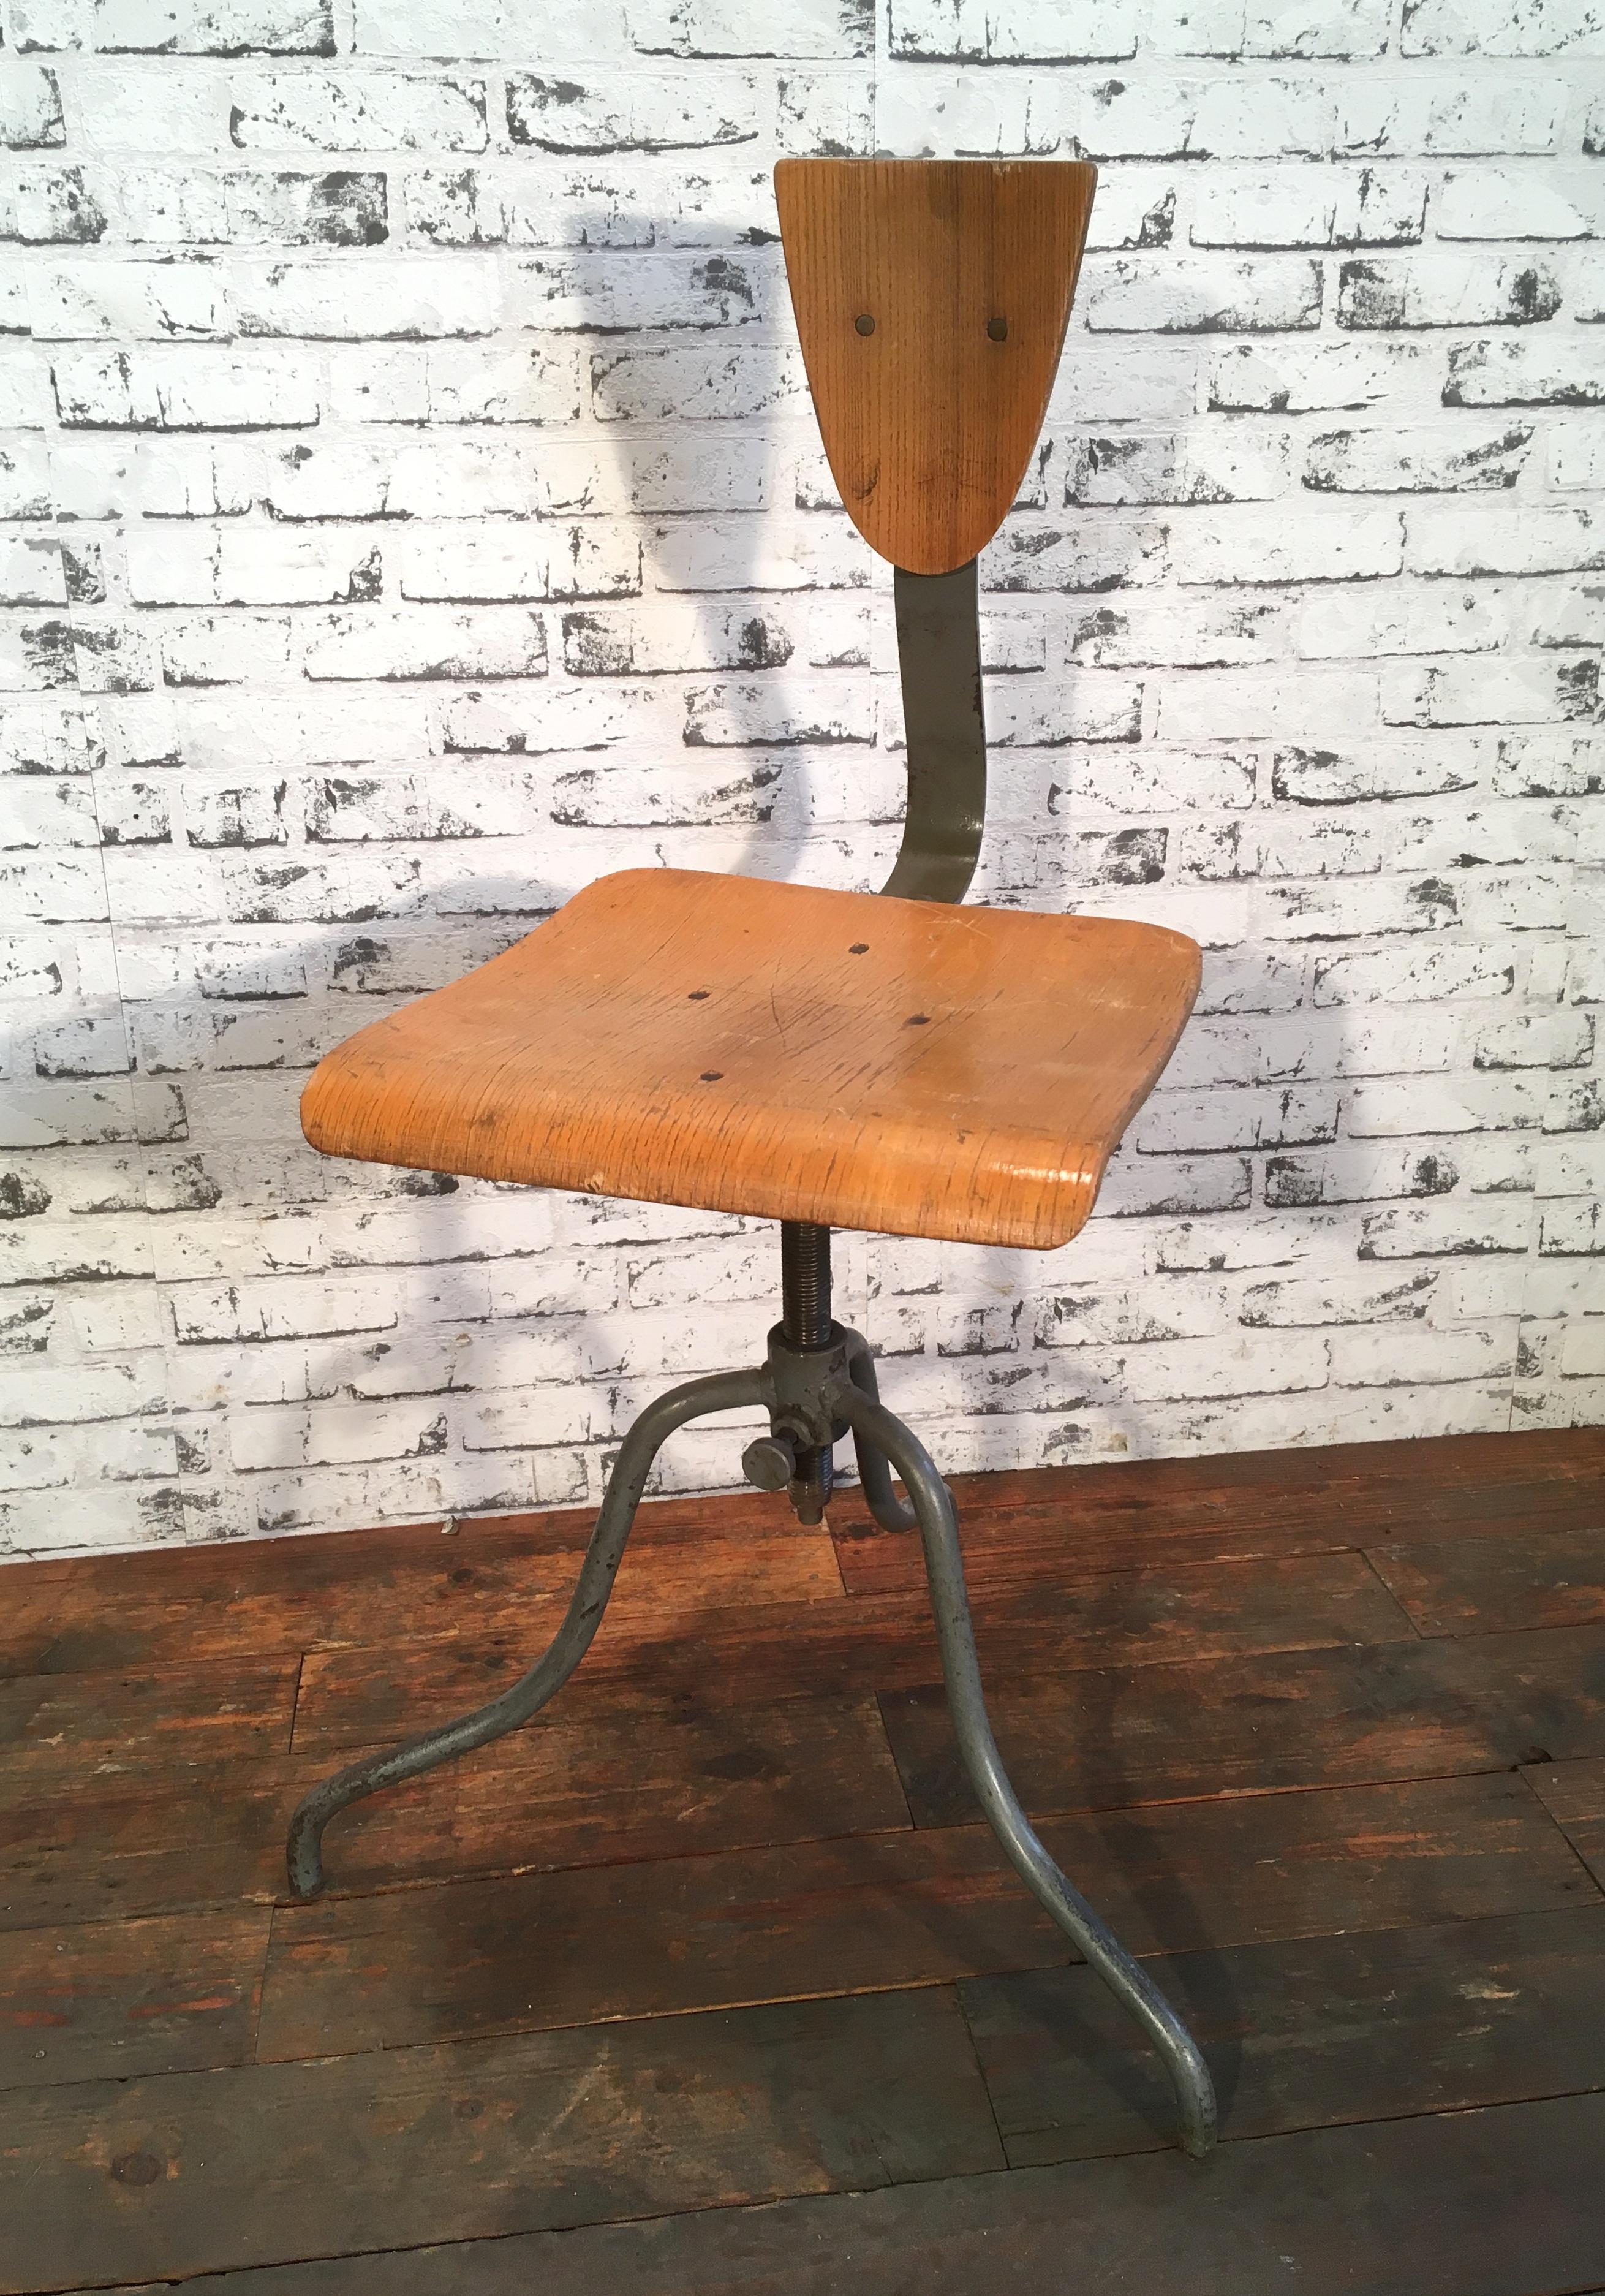 This industrial height adjustable swivel chair was made in former Czechoslovakia during the 1950s. The construction is made of gray painted iron and has a plywood seat and backrest. The chair is in good vintage condition. Weight of the chair is 8